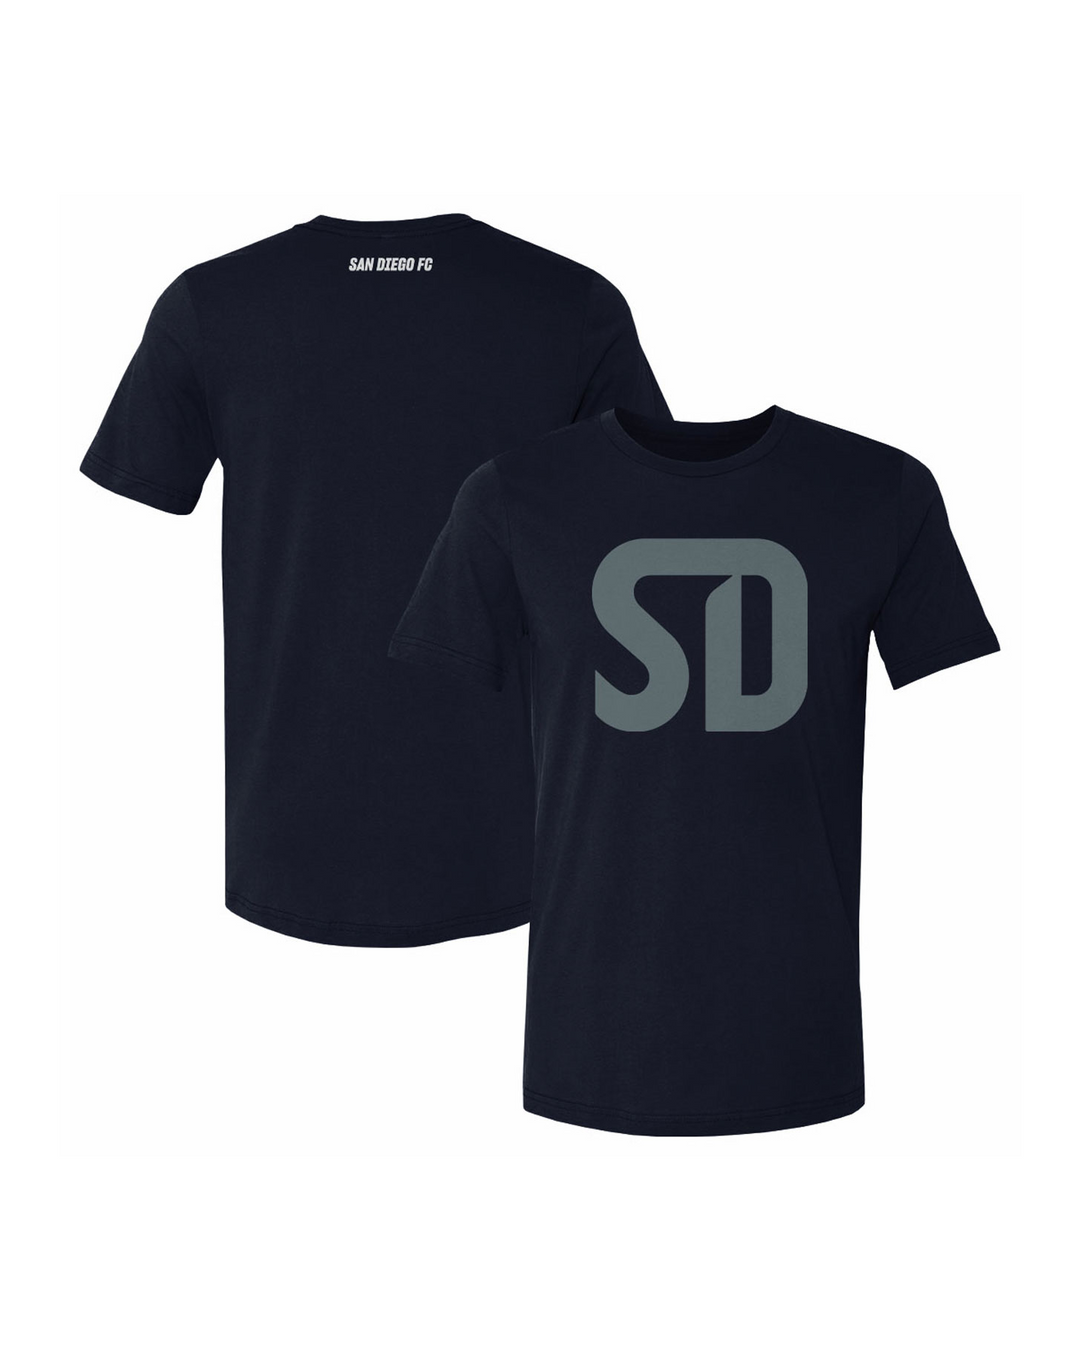 Navy Tee with exploded SD